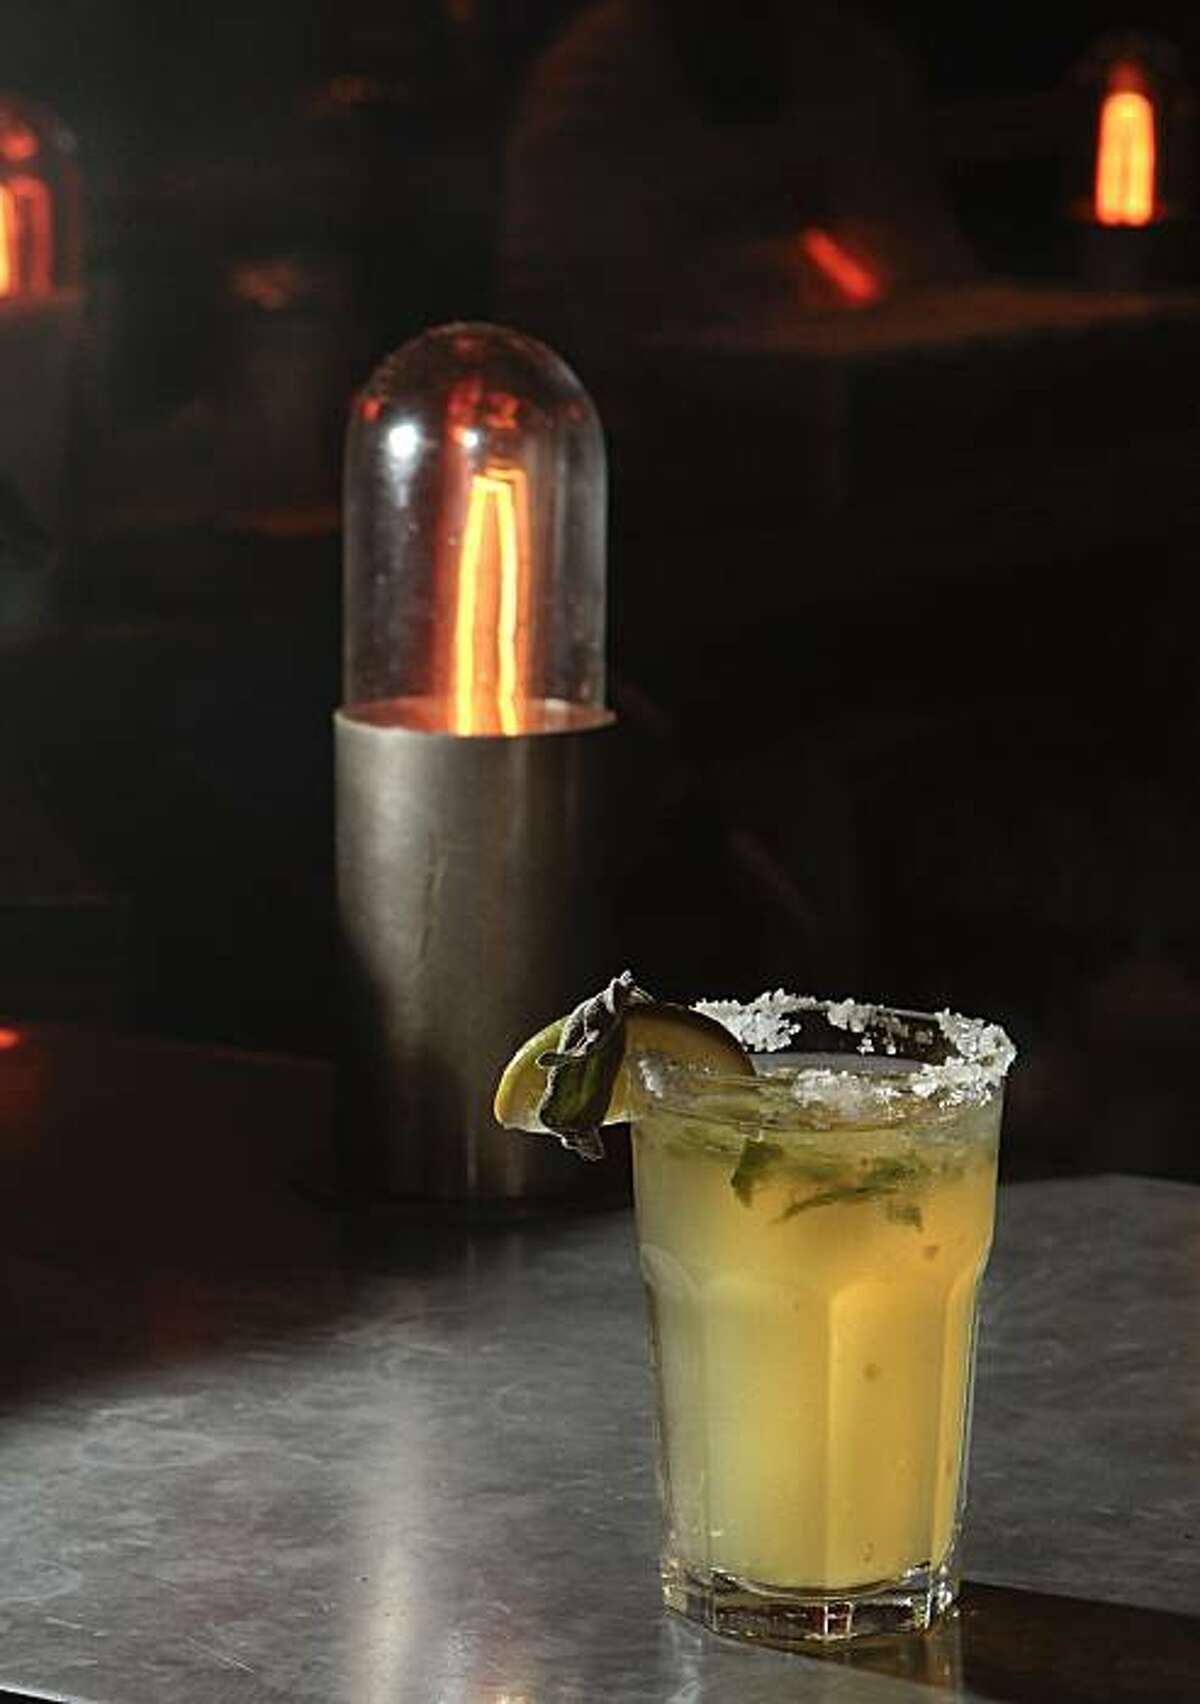 The Spicy Sage Margarita at the Bullitt Bar in San Francisco, Calif., is seen on Wednesday, December 15, 2010.